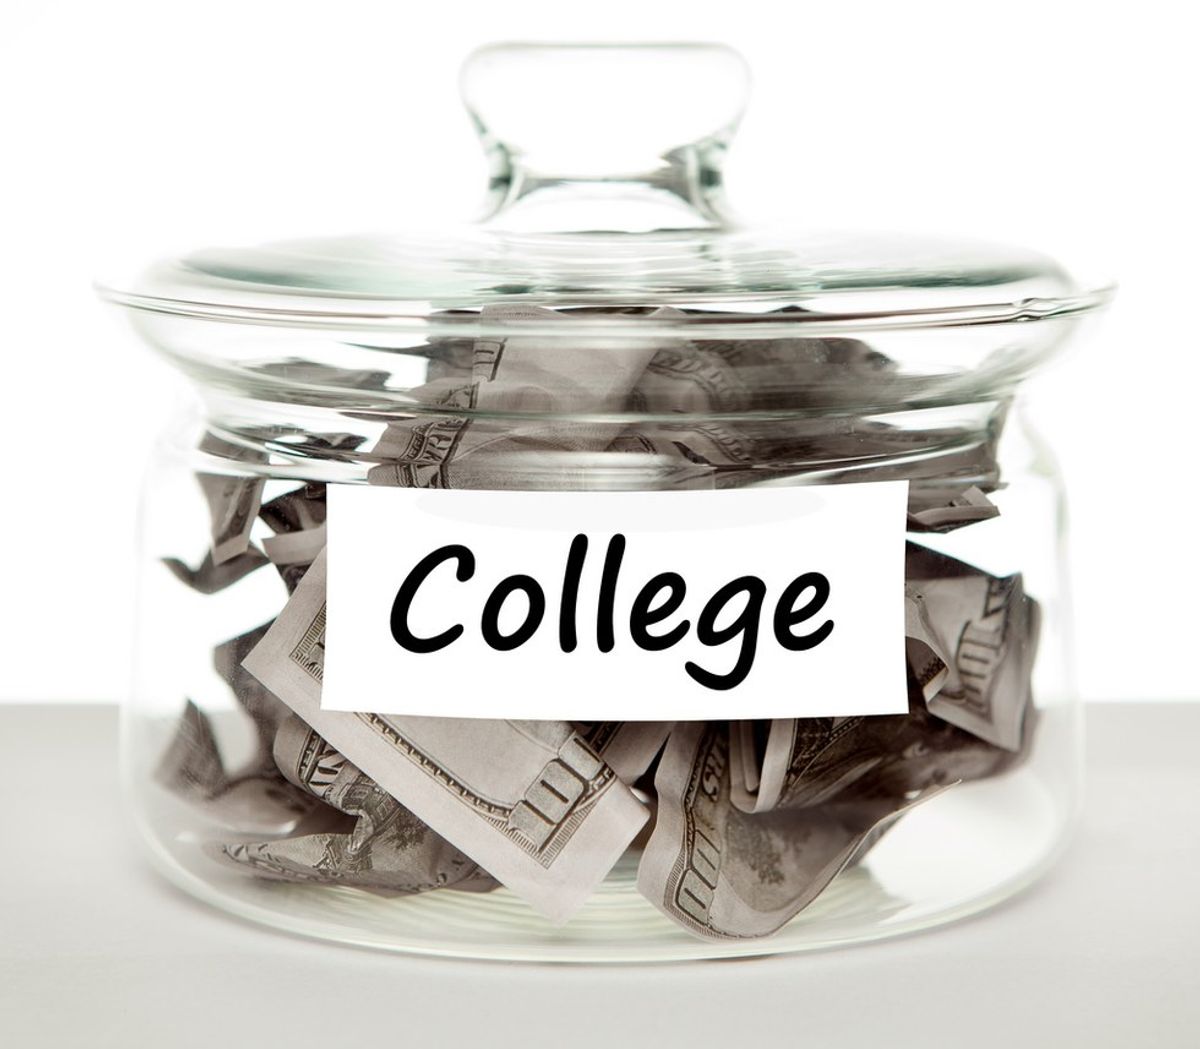 Don't Let Sticker Shock Turn You Away From Your Dream Private College